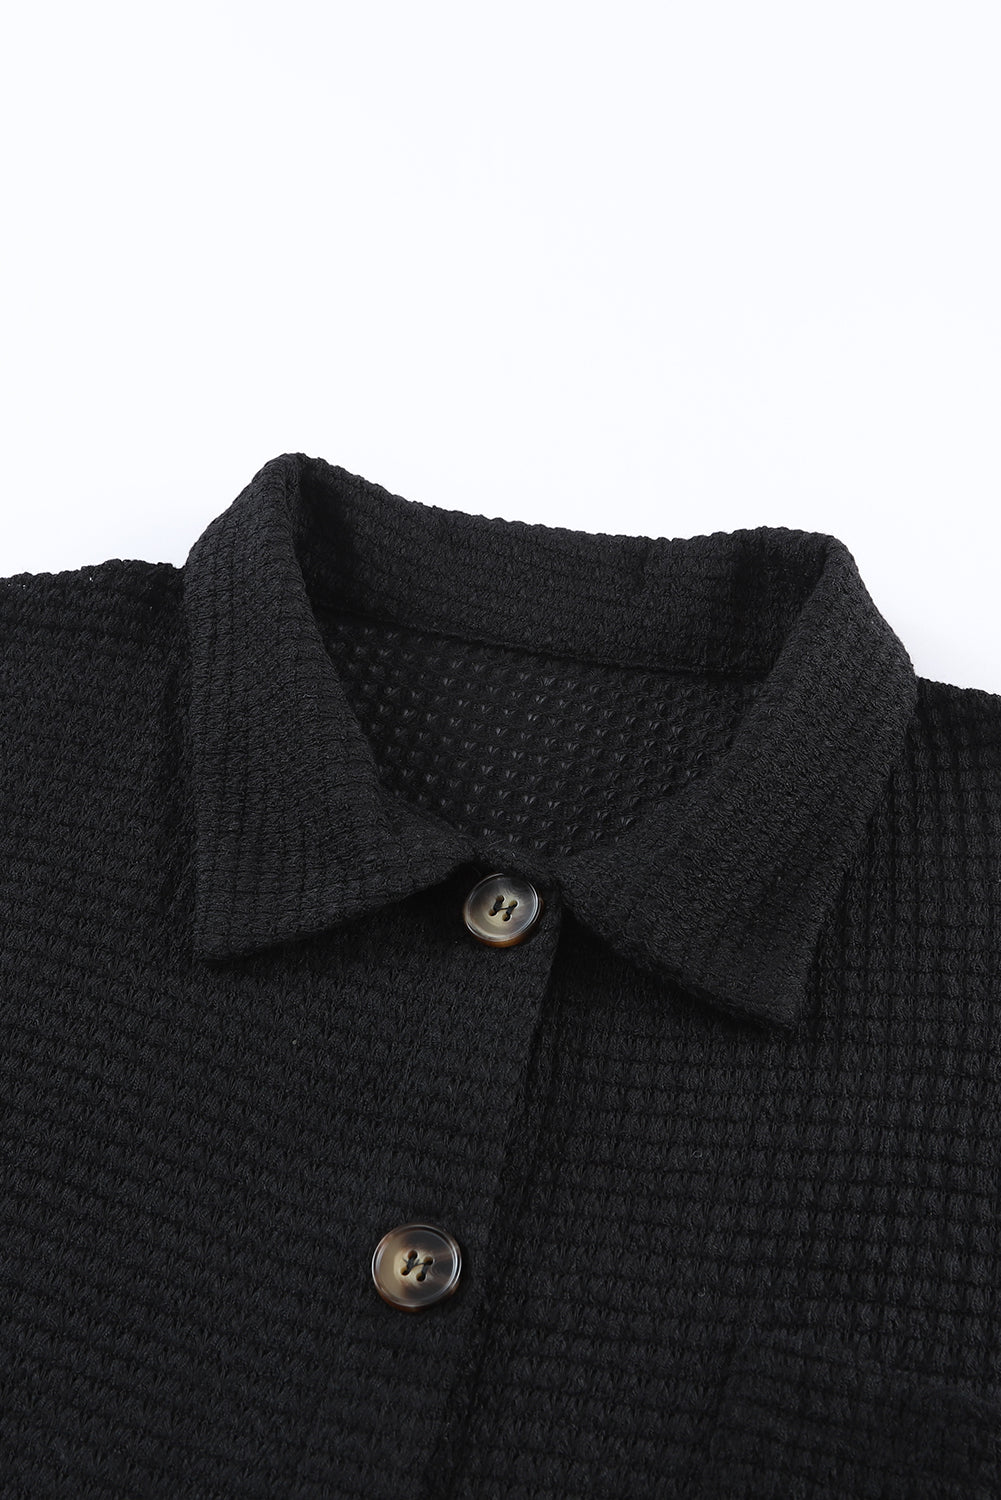 Black Waffle Knit Button Up Casual Shirt-8